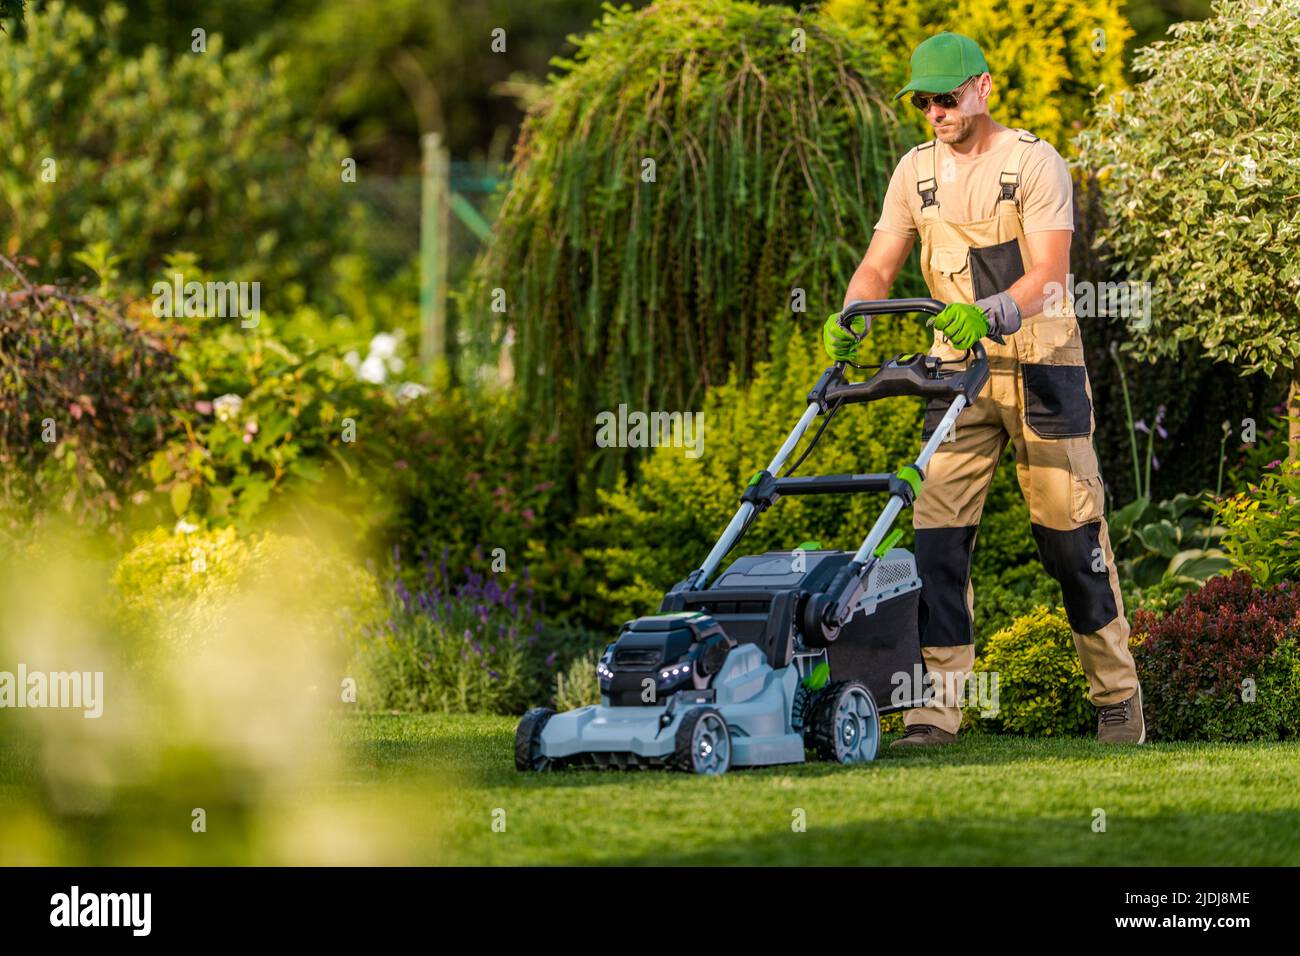 Garden Maintenance Professional Services. Caucasian Gardener Taking Care of the Grass Using Riding Lawn Mower During Summer Season. Stock Photo